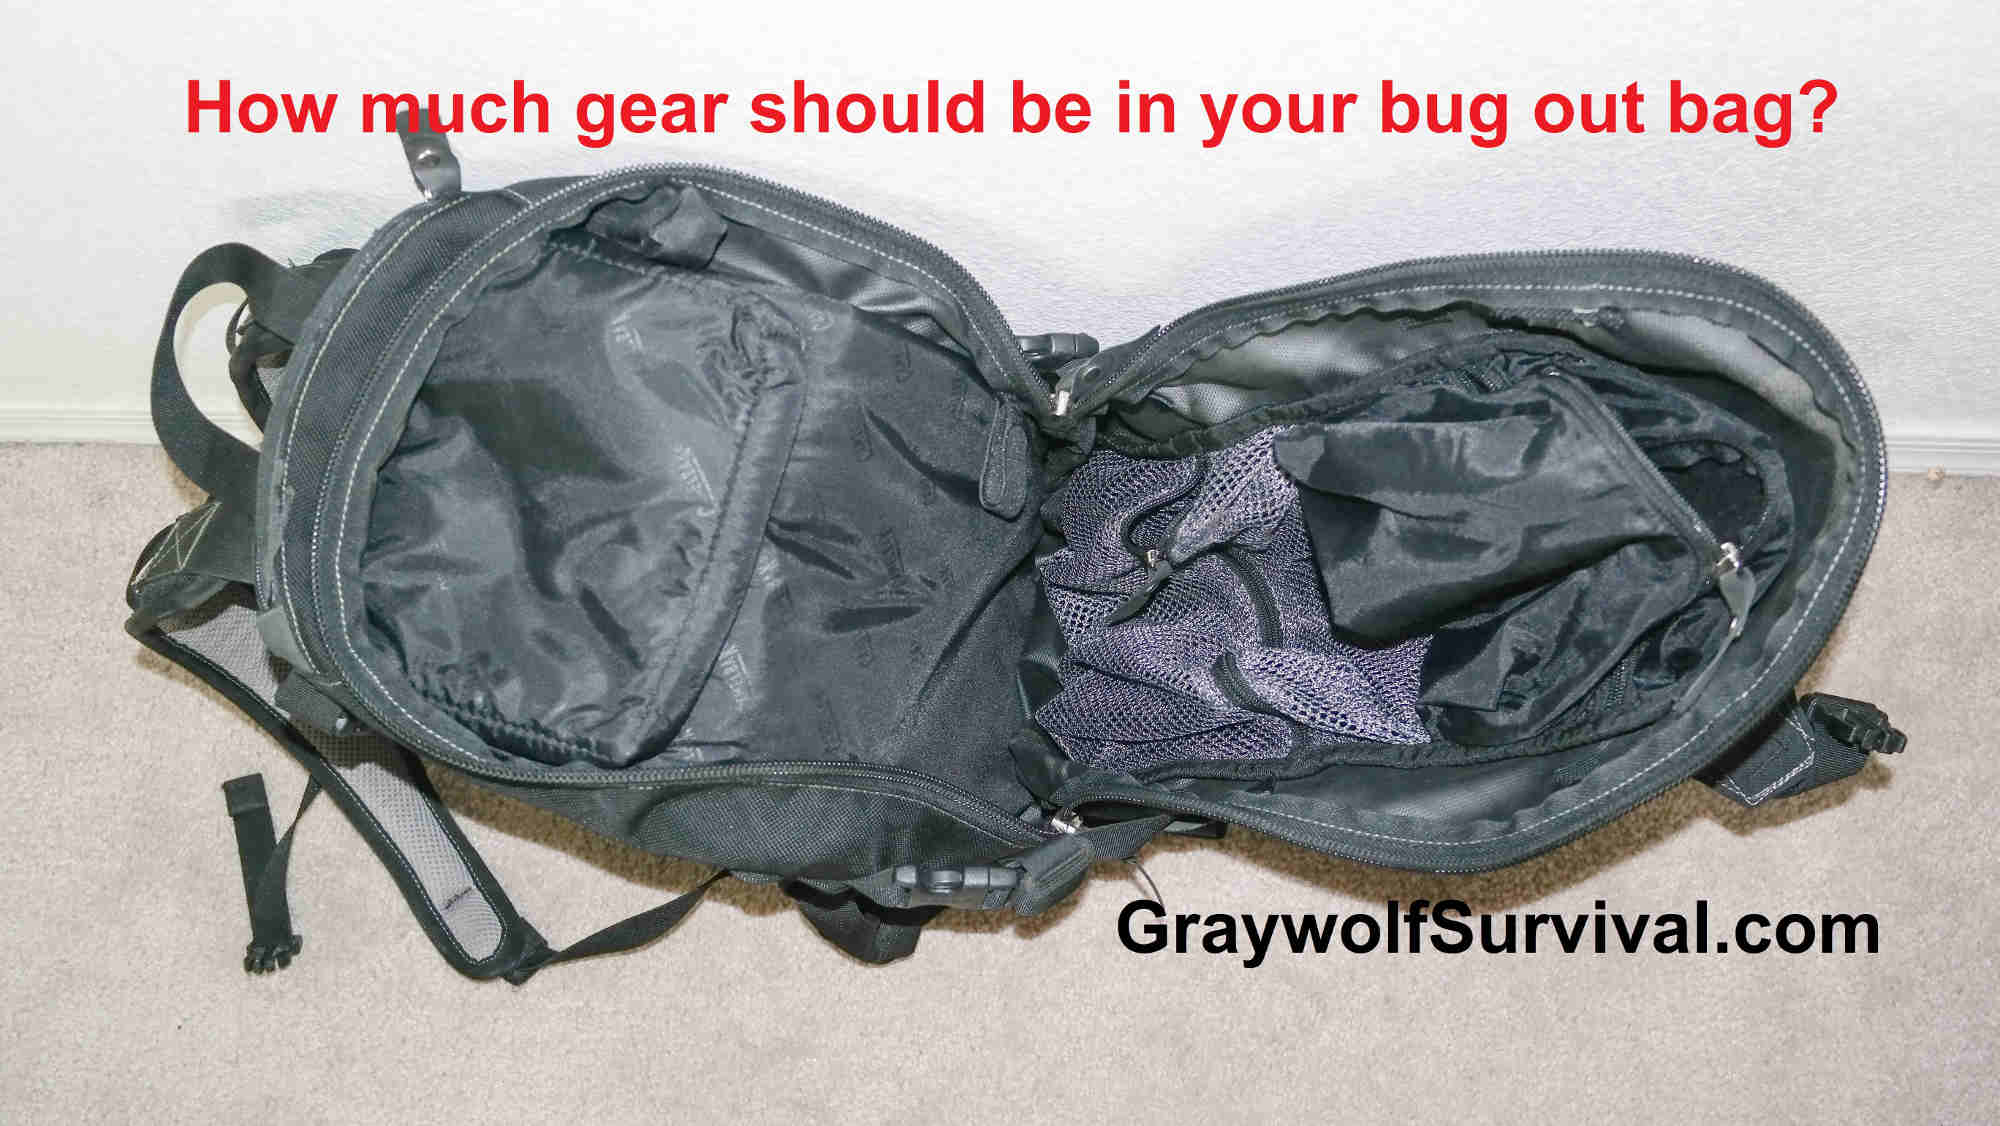 How much gear can you really carry in your bug out bag?